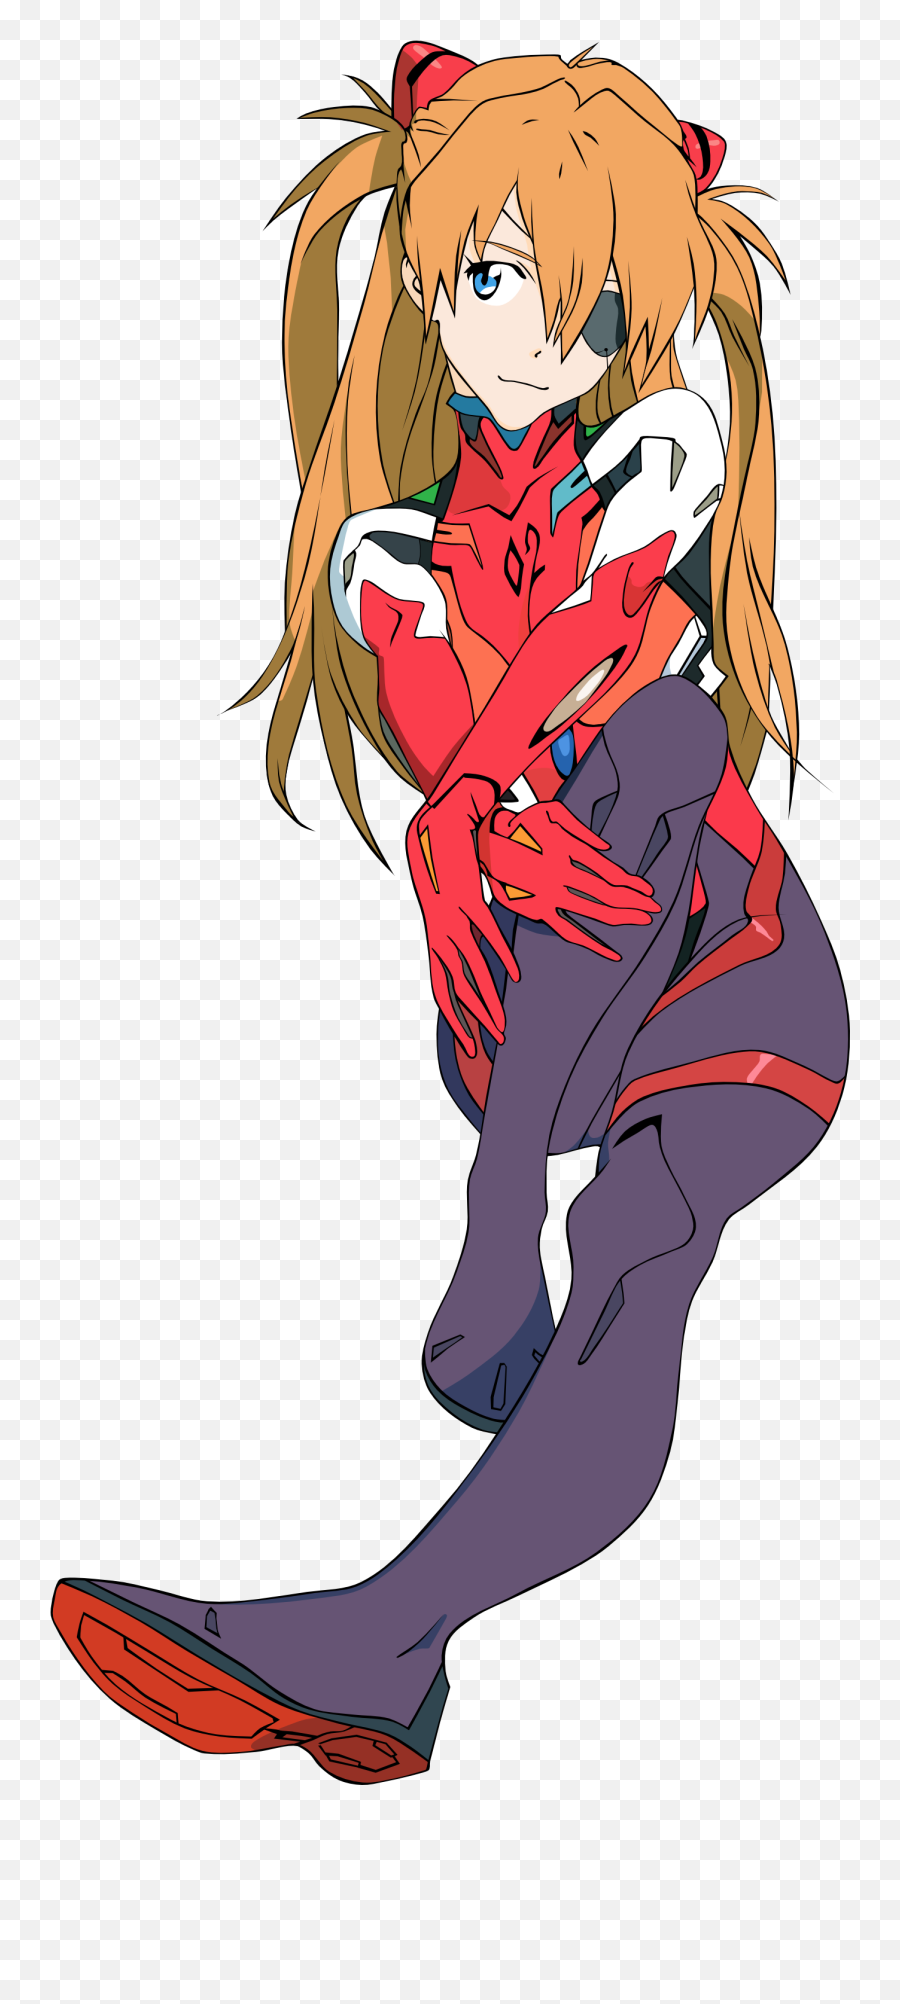 Download Hd Asuka From Evangelion - Evangelion 30 You Can Evangelion Asuka Transparent Png,Asuka Png